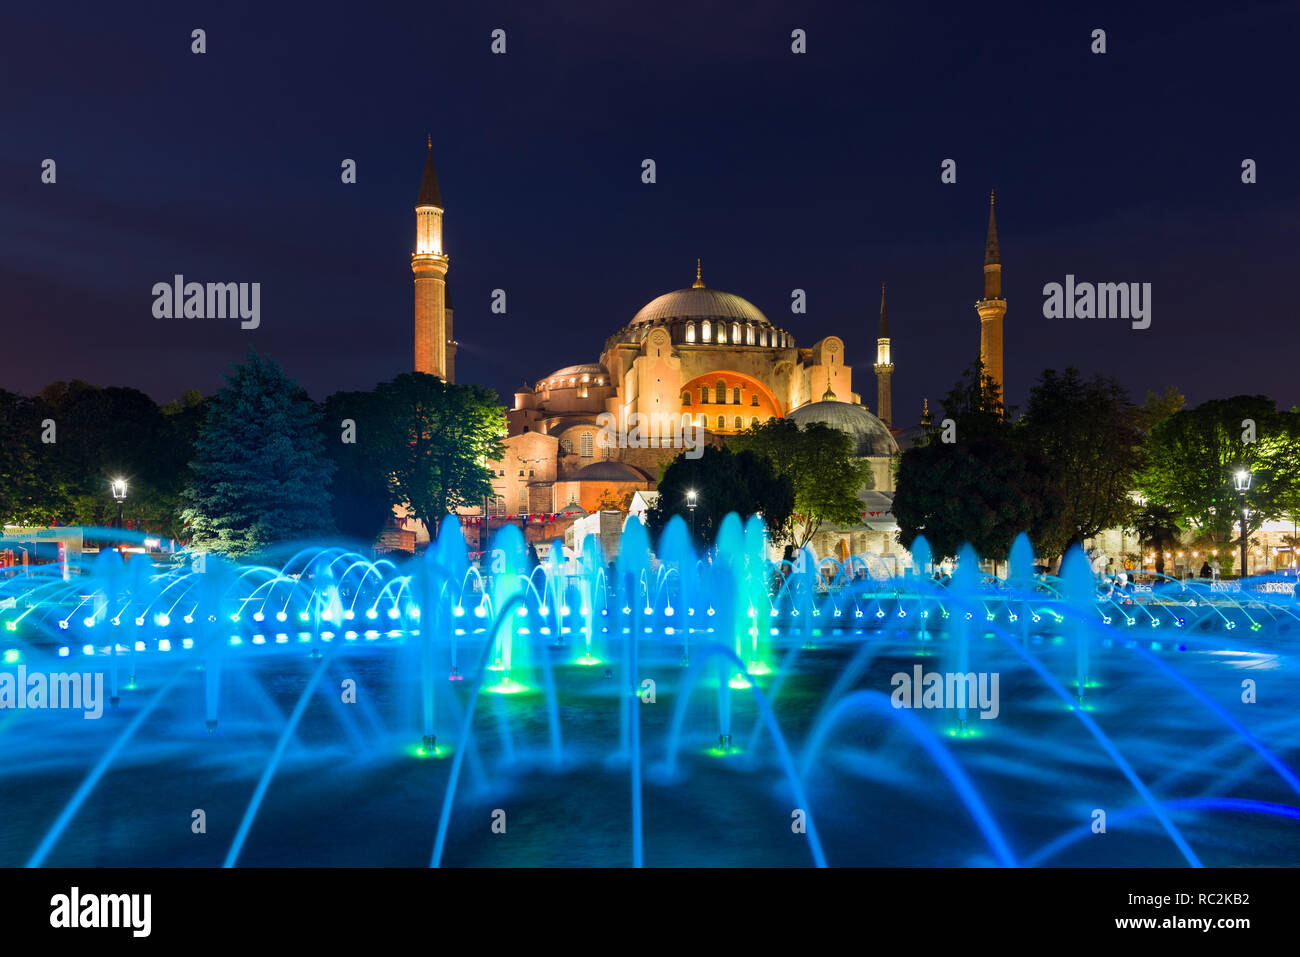 The Sultan Ahmad Maydan water fountain lit up with the Hagia Sophia museum in background at dusk, Istanbul, Turkey Stock Photo